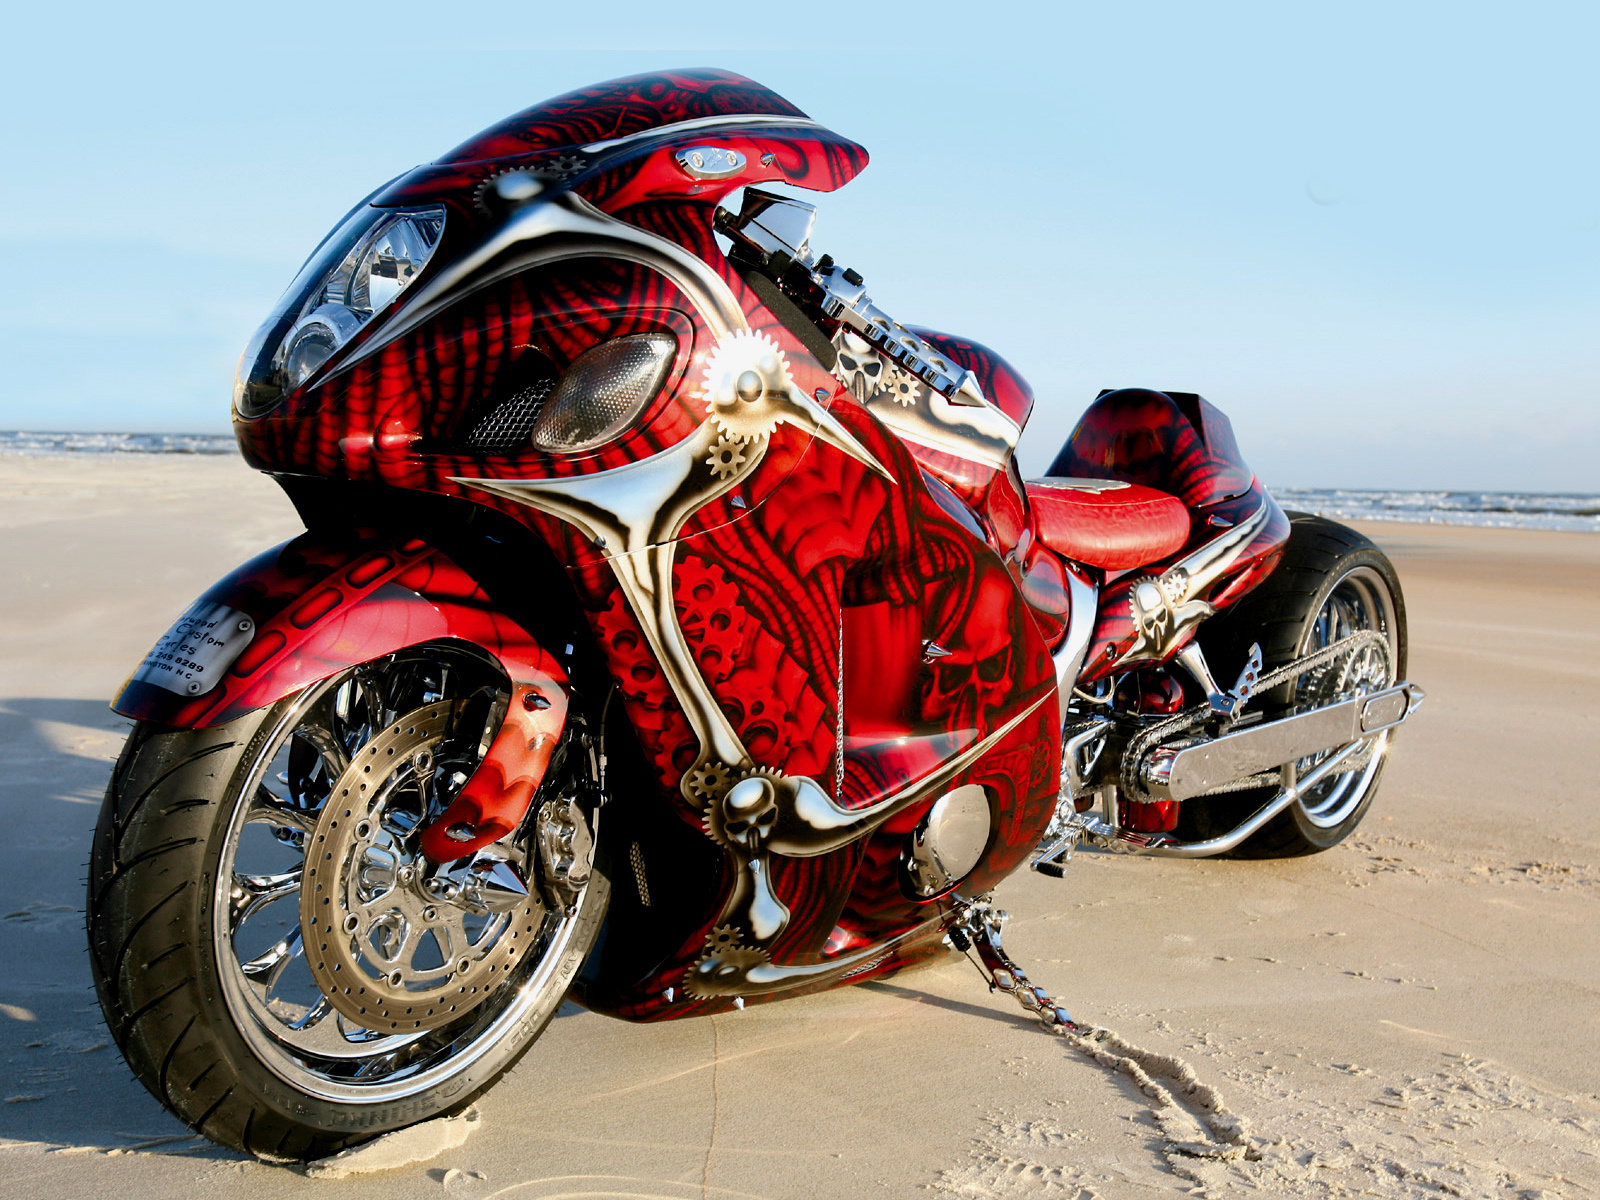 Vehicles Motorcycle HD Wallpaper | Background Image